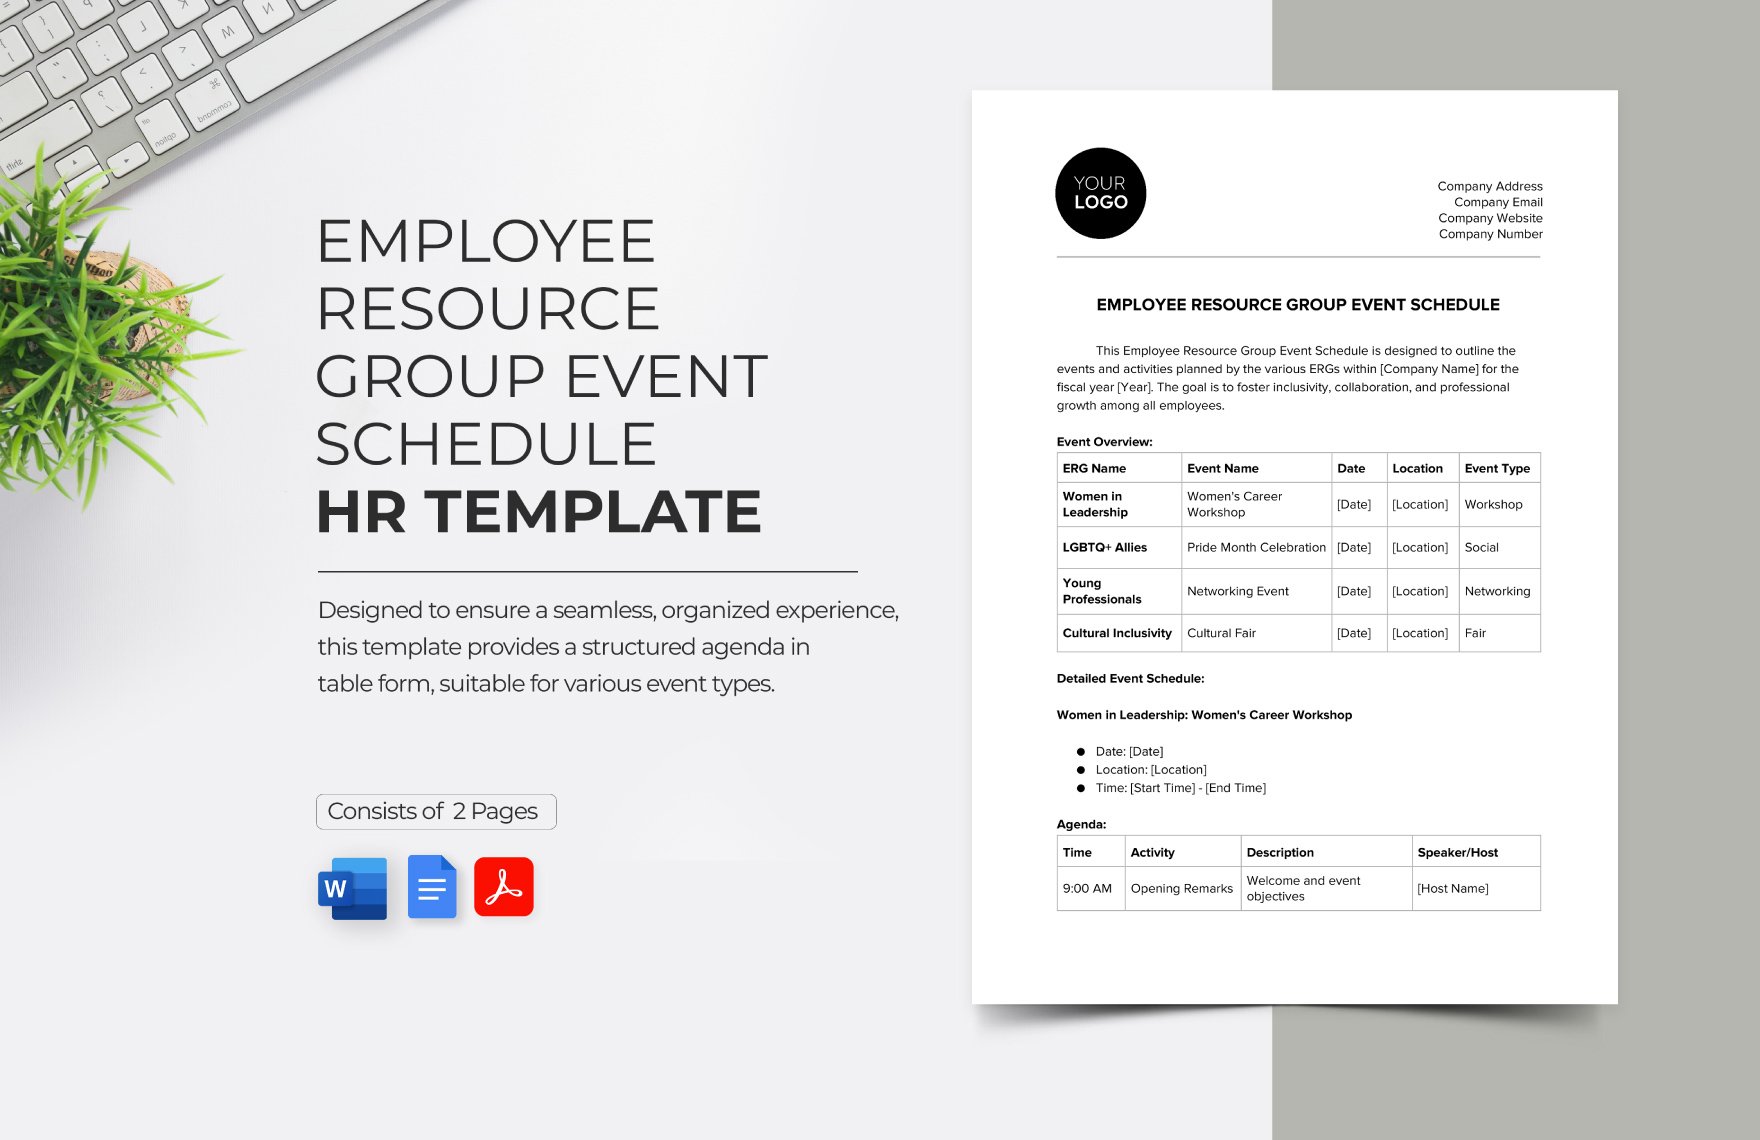 Employee Resource Group Event Schedule HR Template